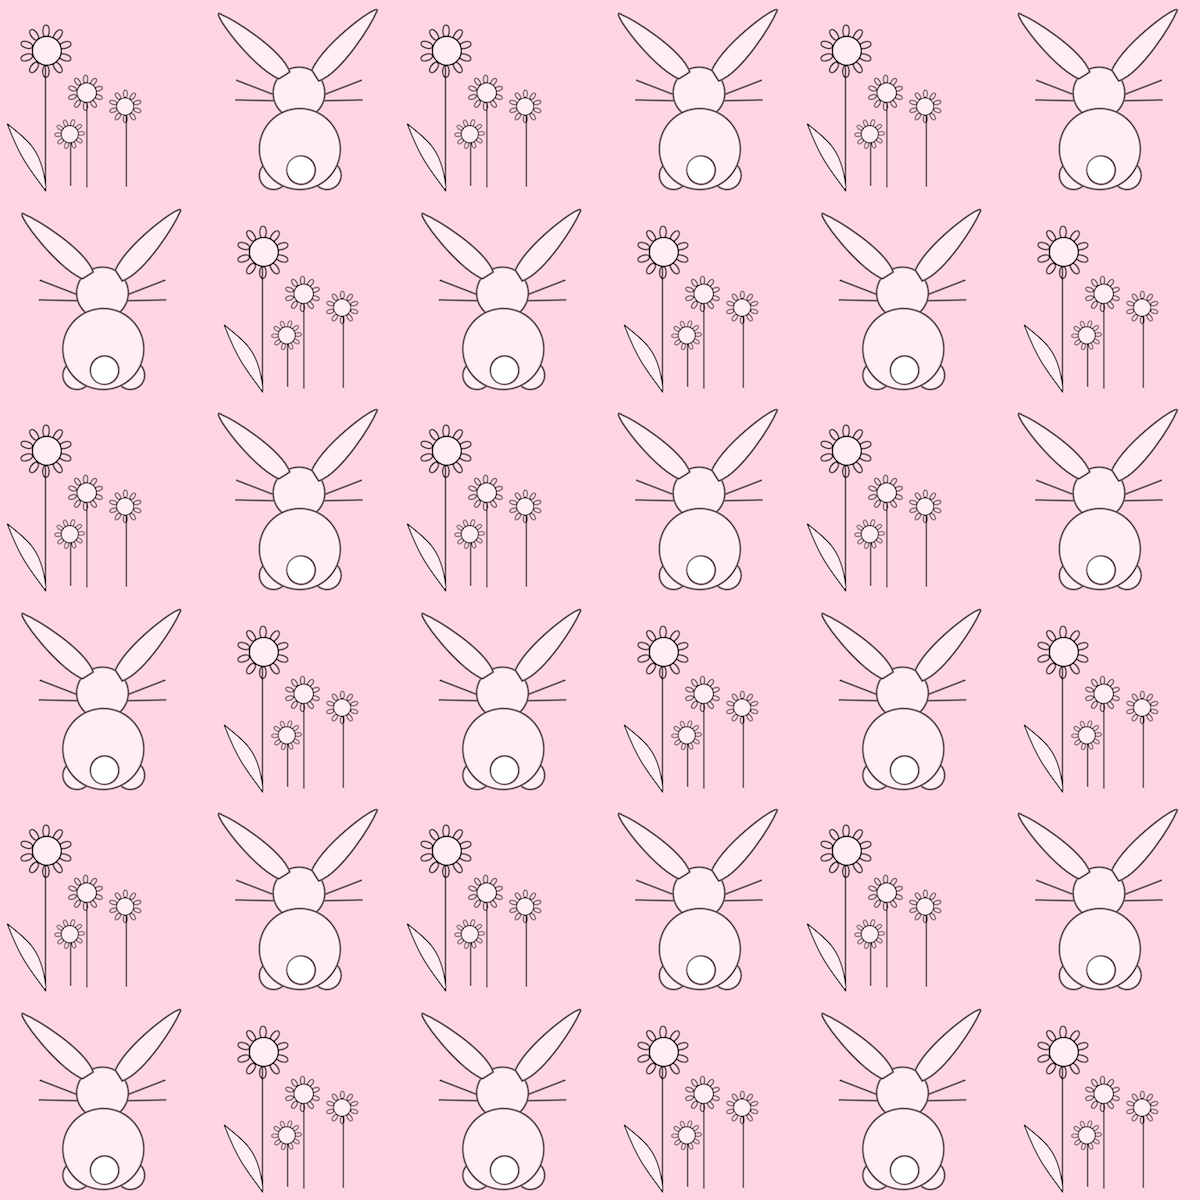 Easter Bunnies Full Nail Art Waterslide Decal Design - Nails Creations